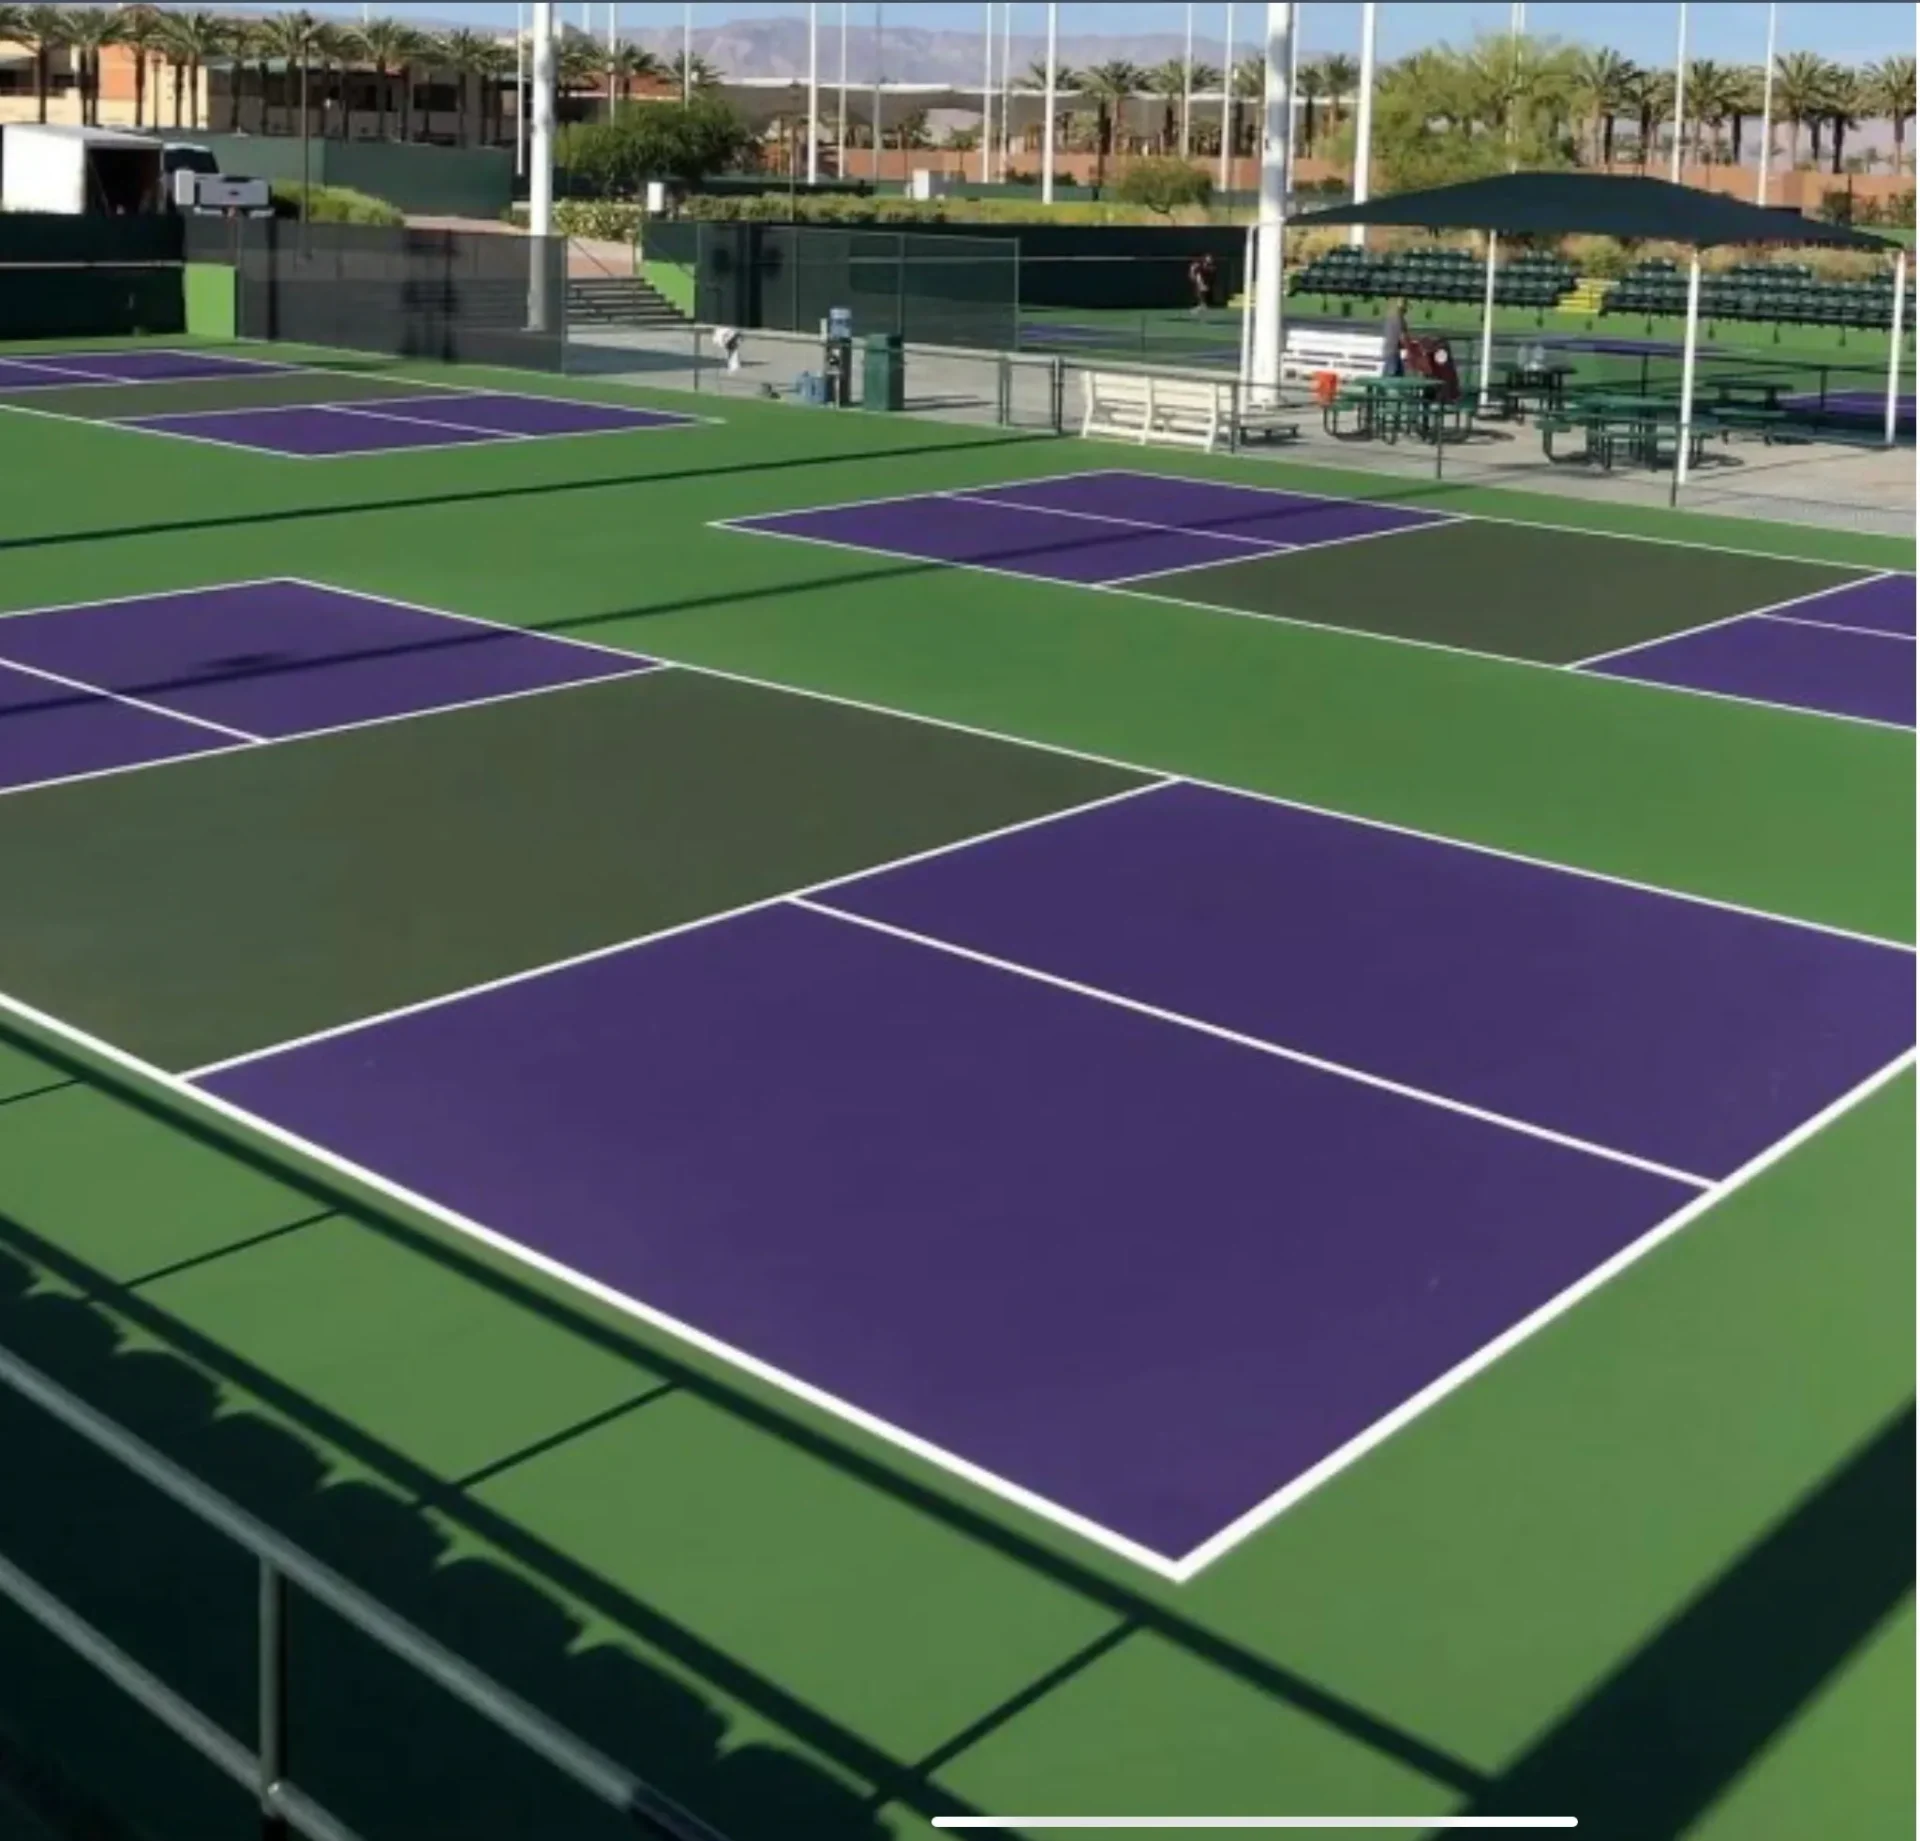 A tennis court with many different colors of the same color.